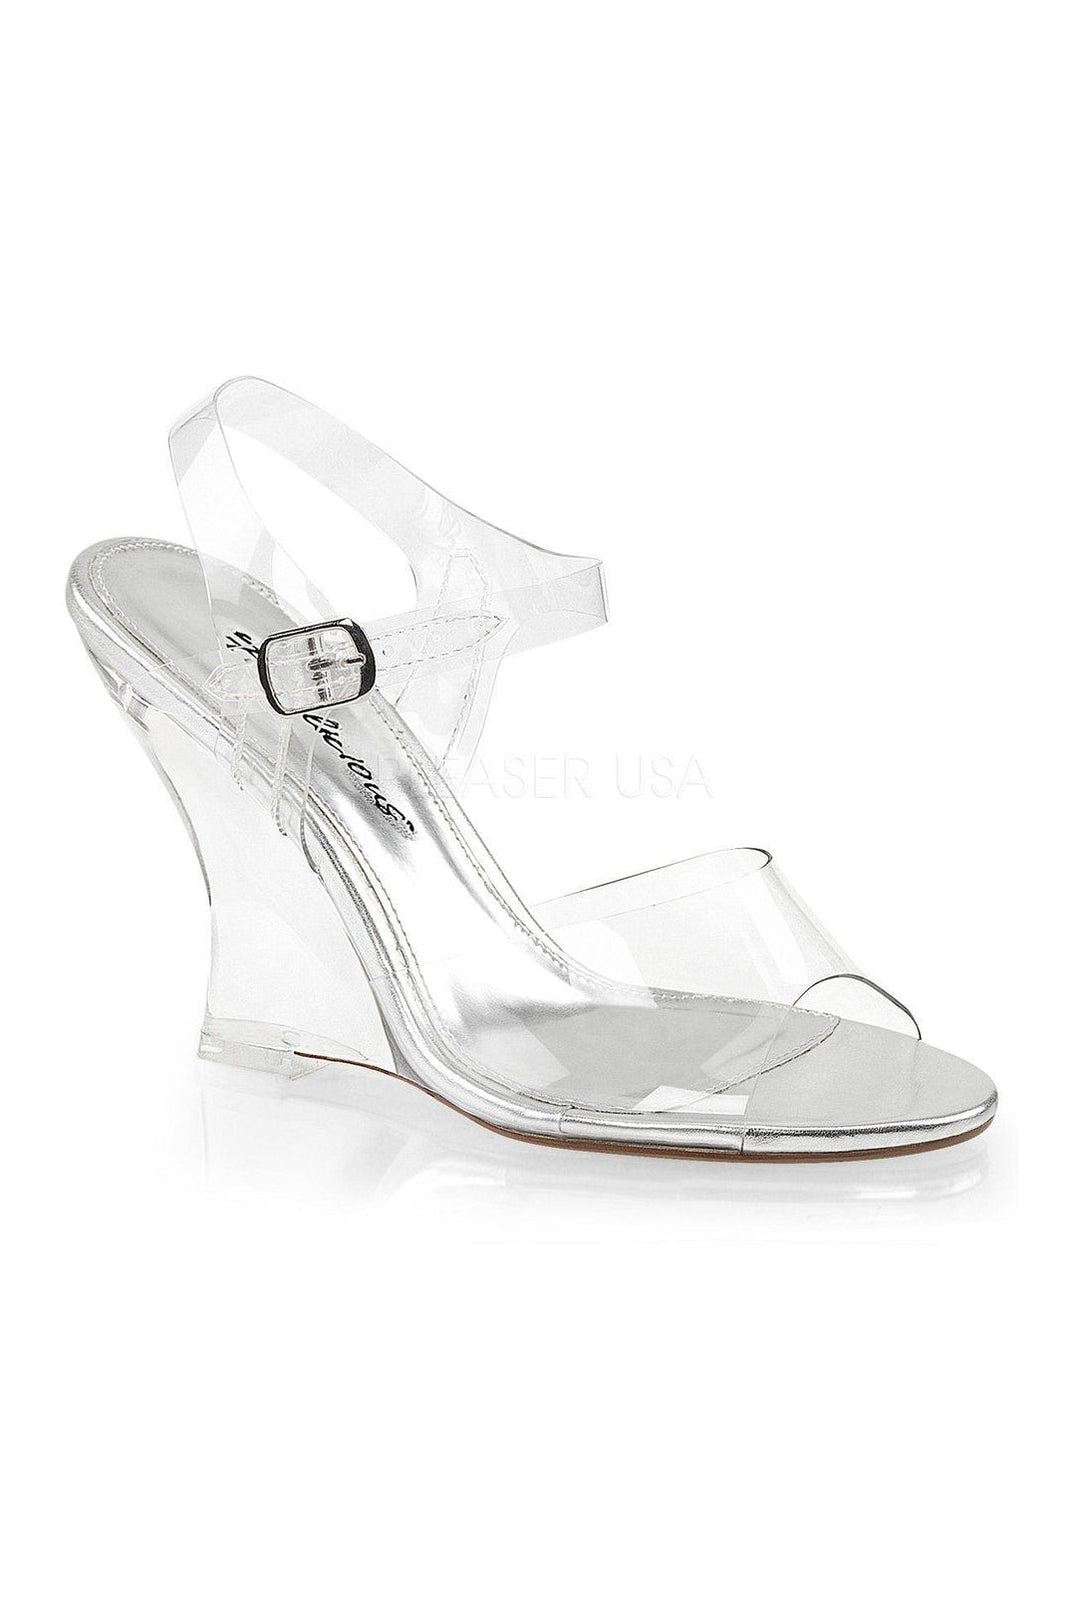 LOVELY-408 Sandal | Clear Vinyl-Fabulicious-Clear-Wedges-SEXYSHOES.COM